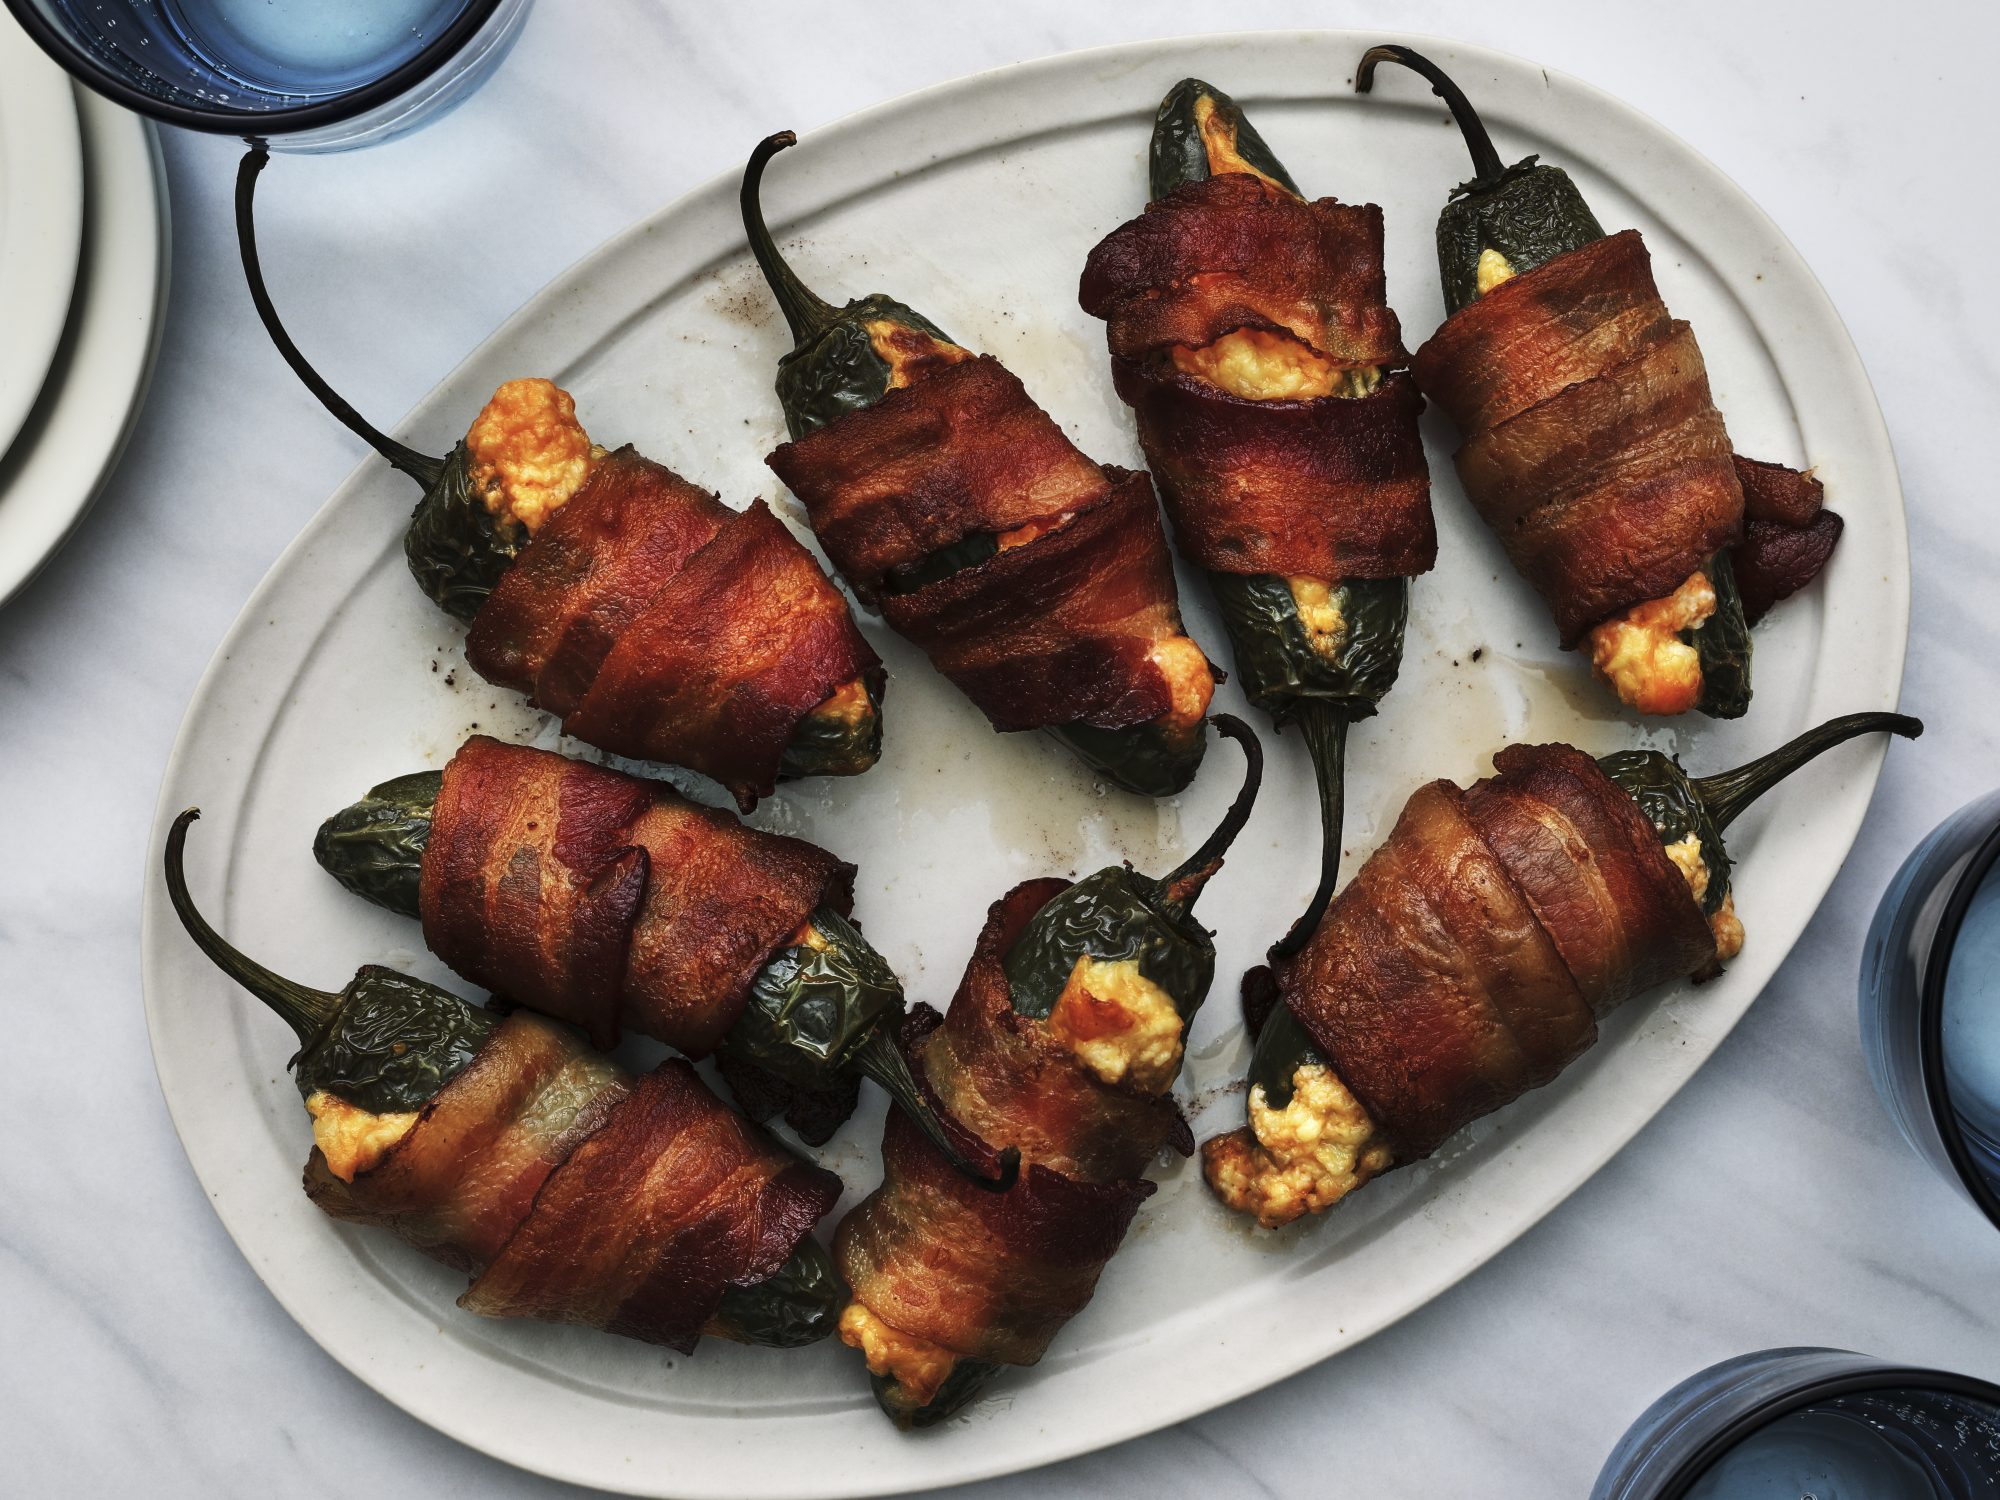 https://static.onecms.io/wp-content/uploads/sites/19/2020/02/28/bacon_wrapped_jalapeno_poppers_0011-2000.jpg